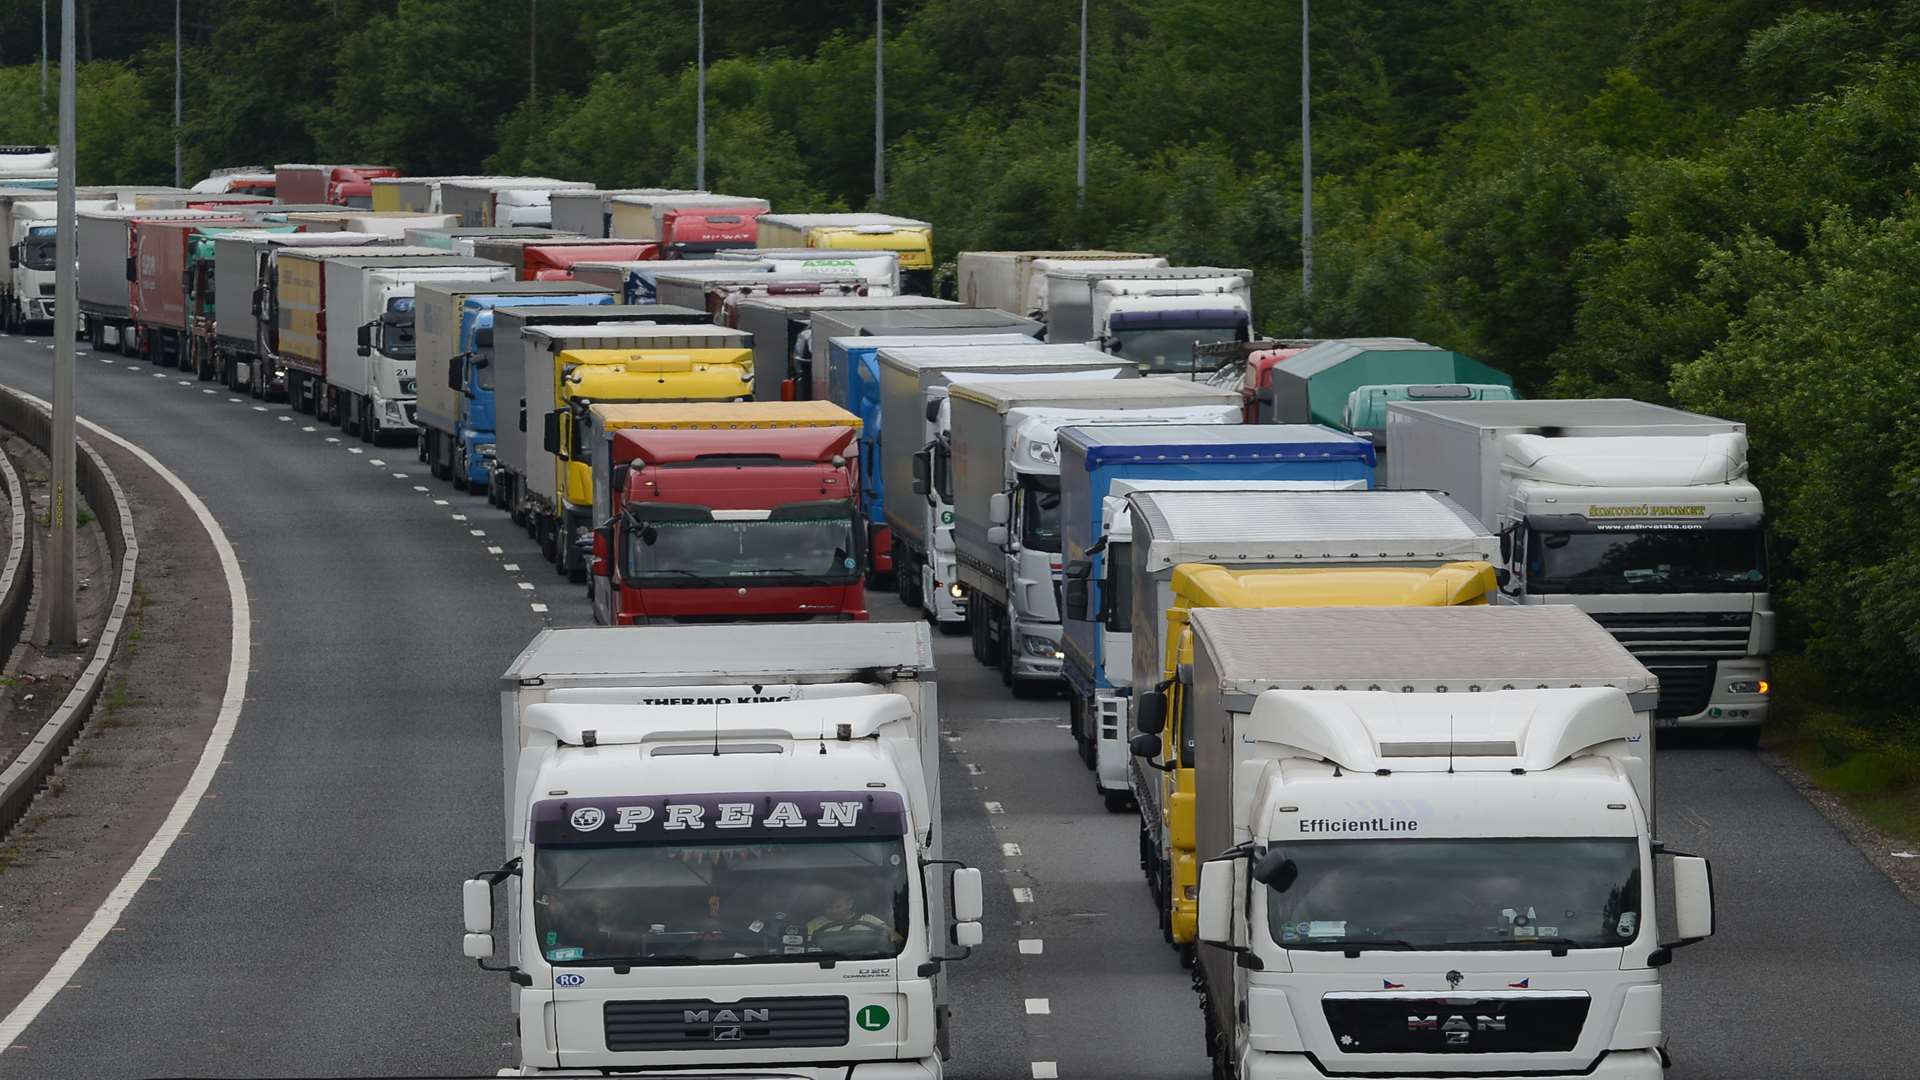 Operation Stack in effect on the M20